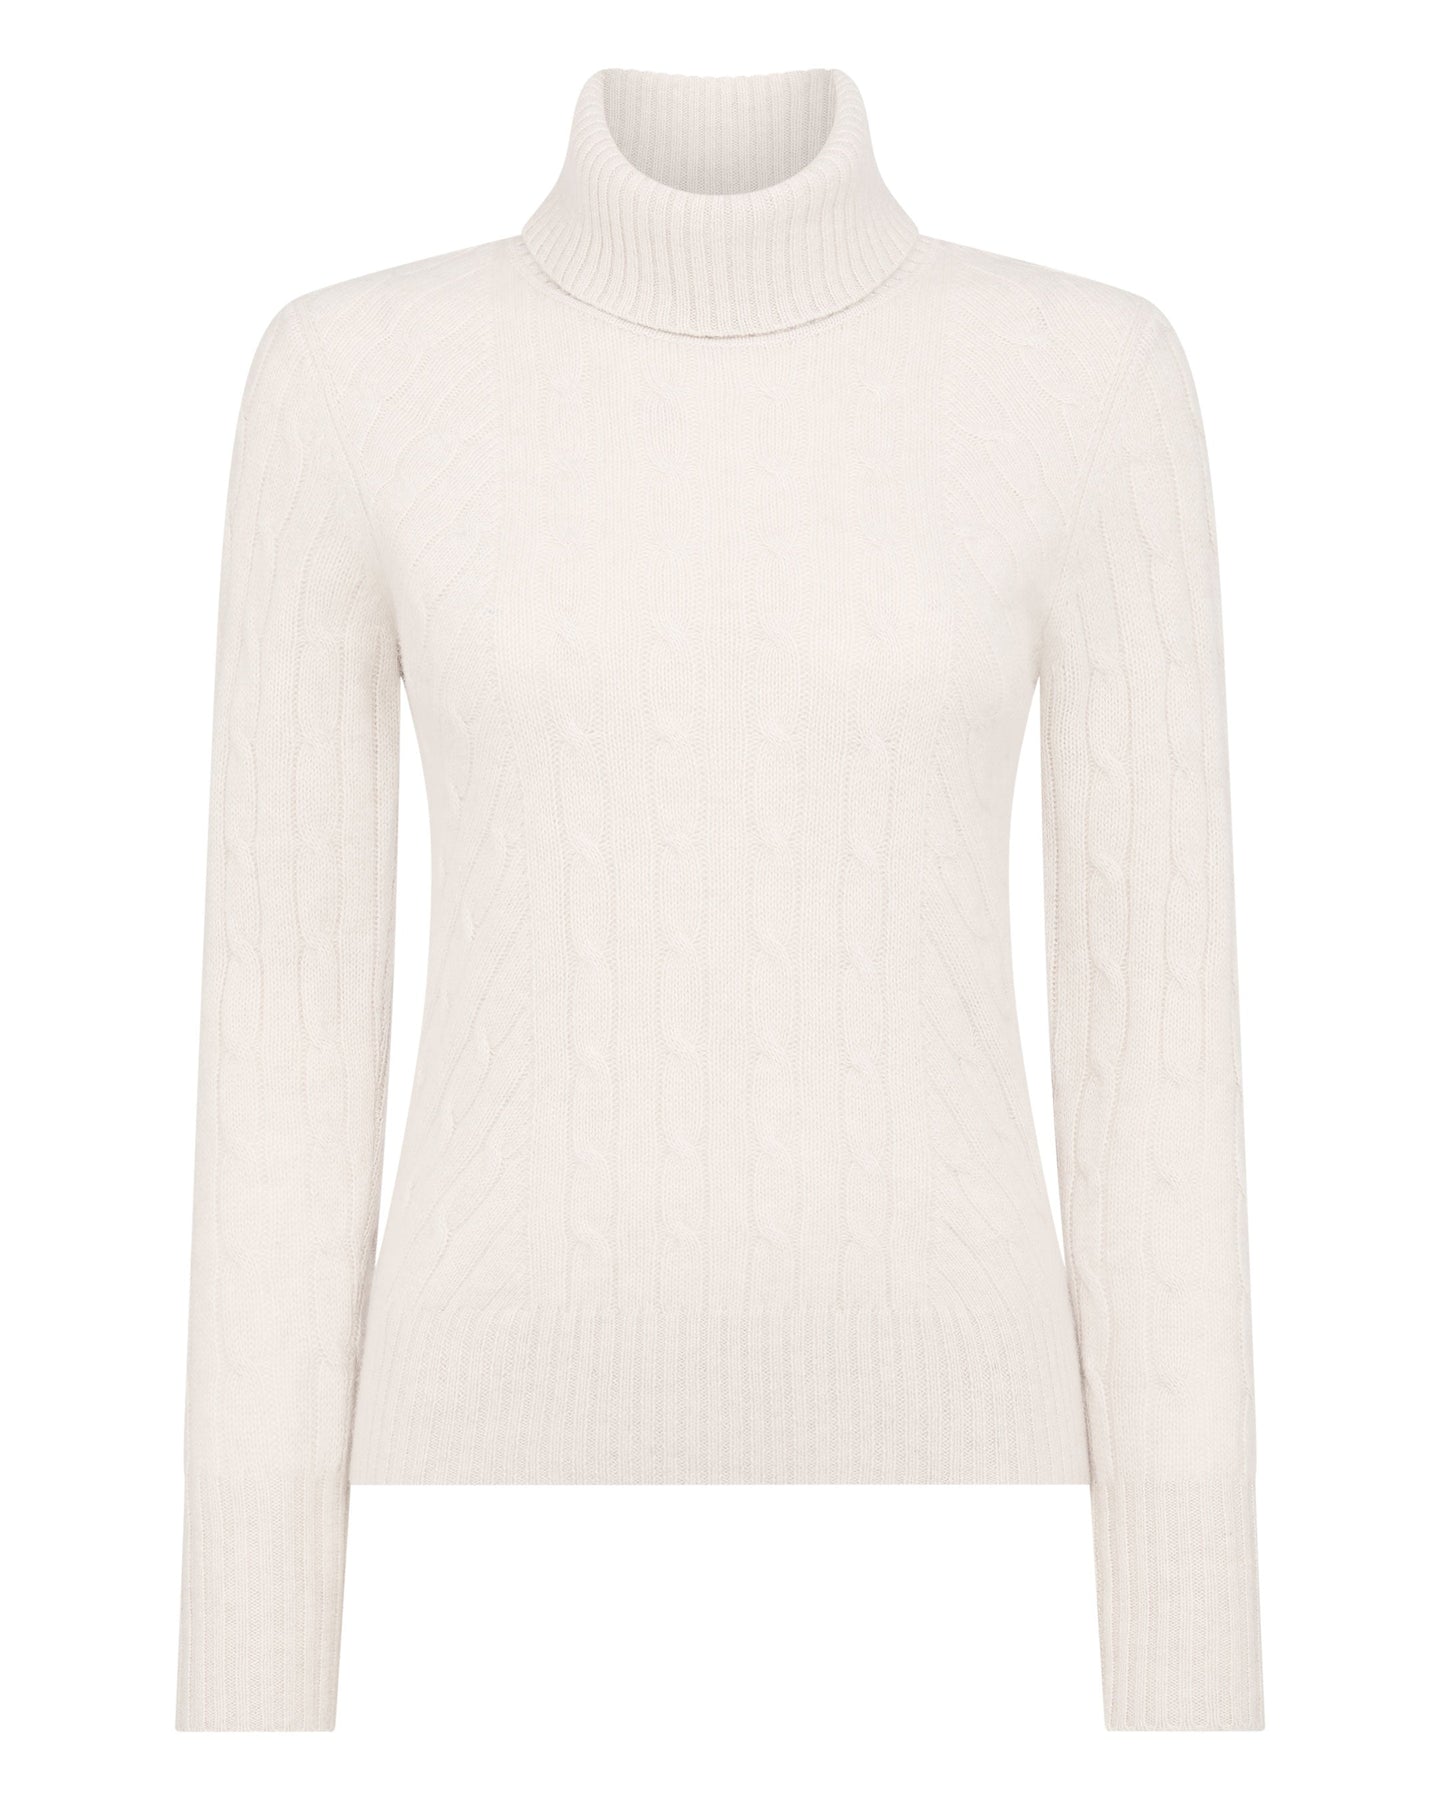 N.Peal Women's Cable Roll Neck Cashmere Jumper Ecru White